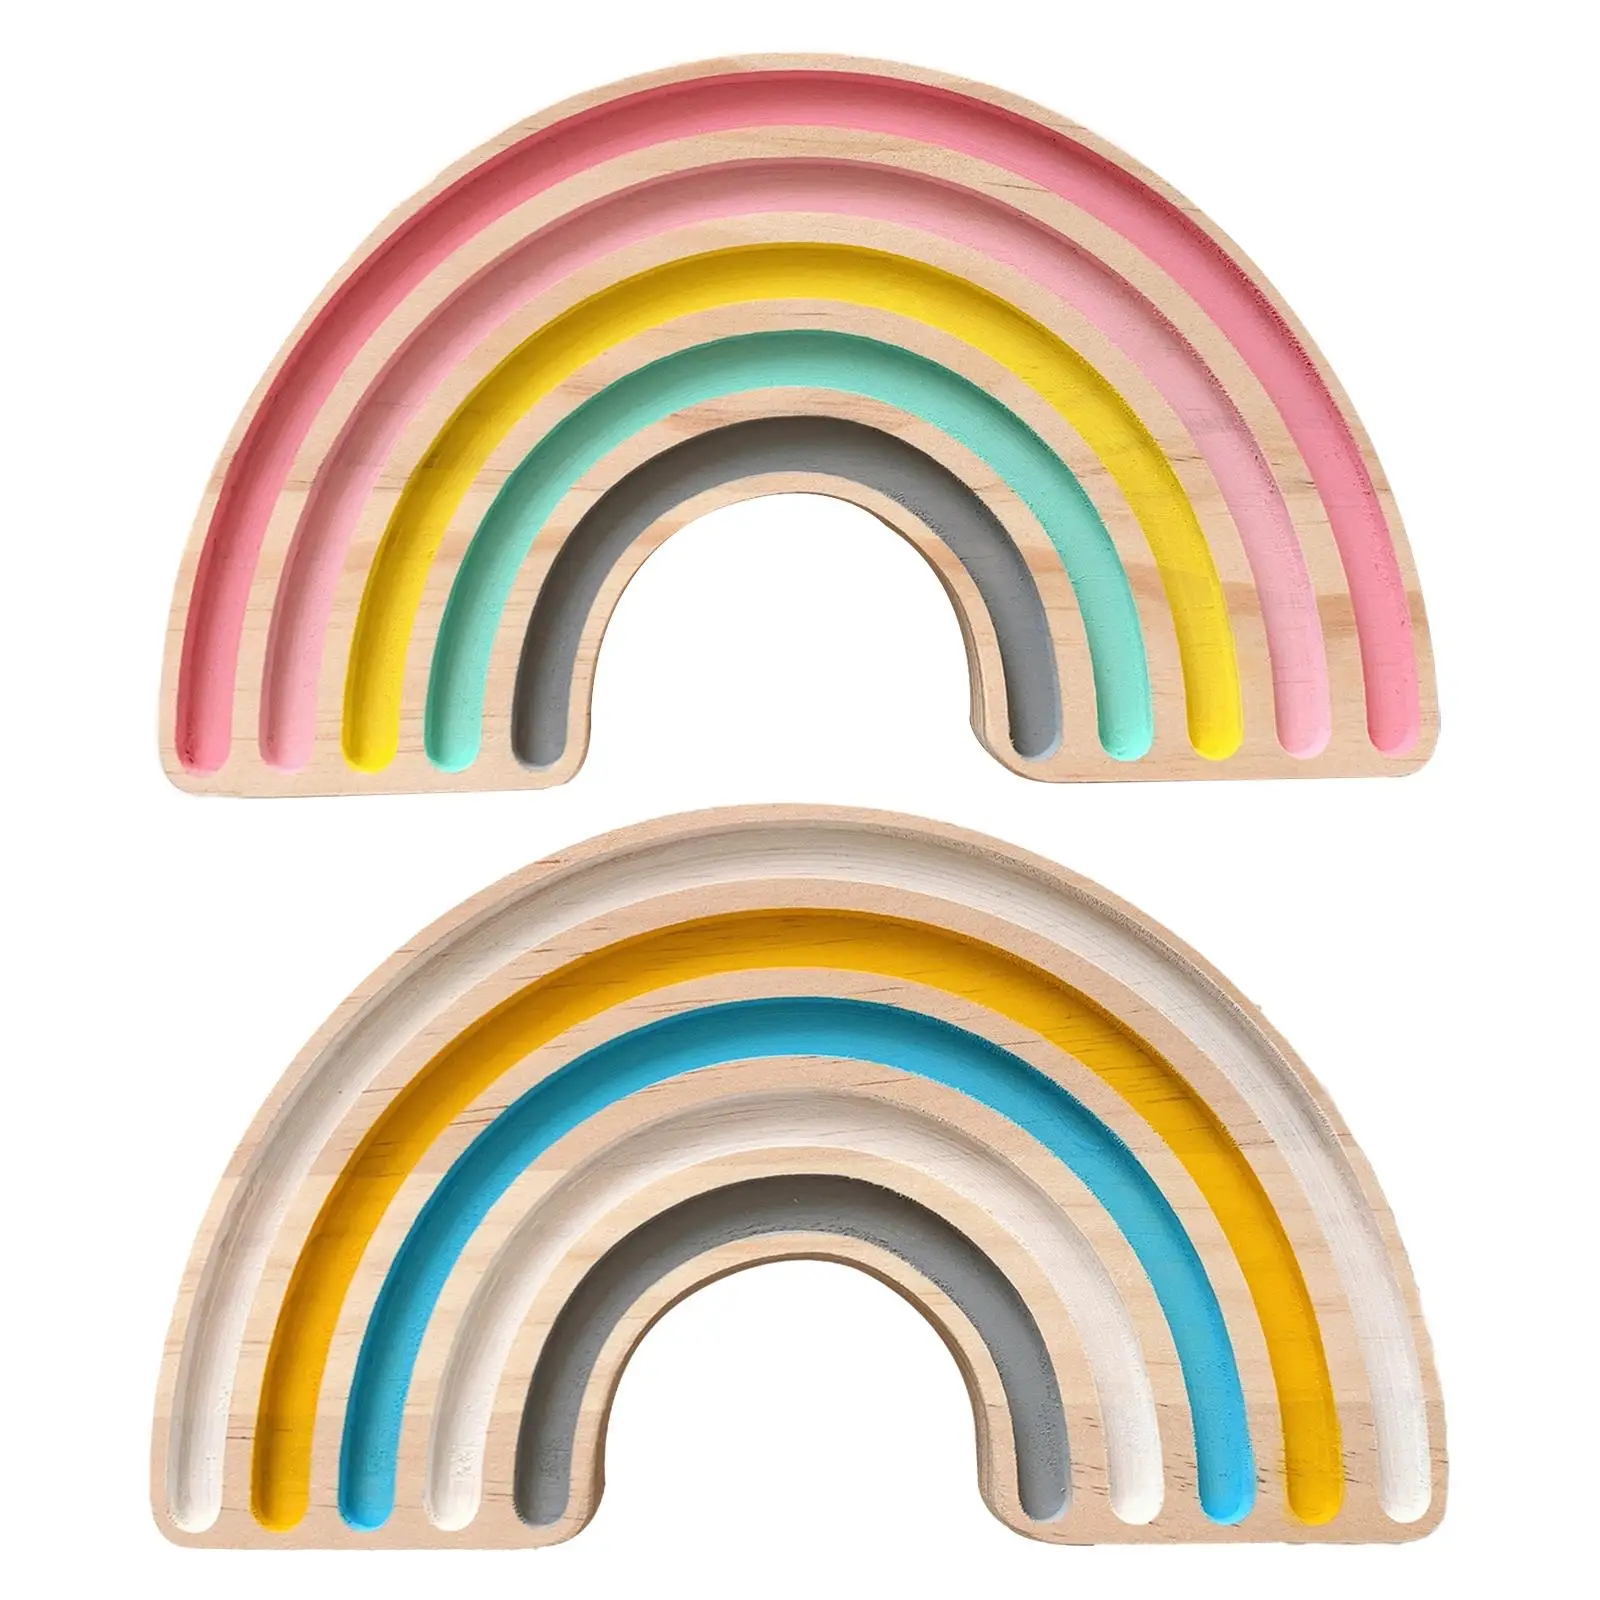 Wooden Rainbow Craft Board Ornament for Table Bookshelves Photographic Props